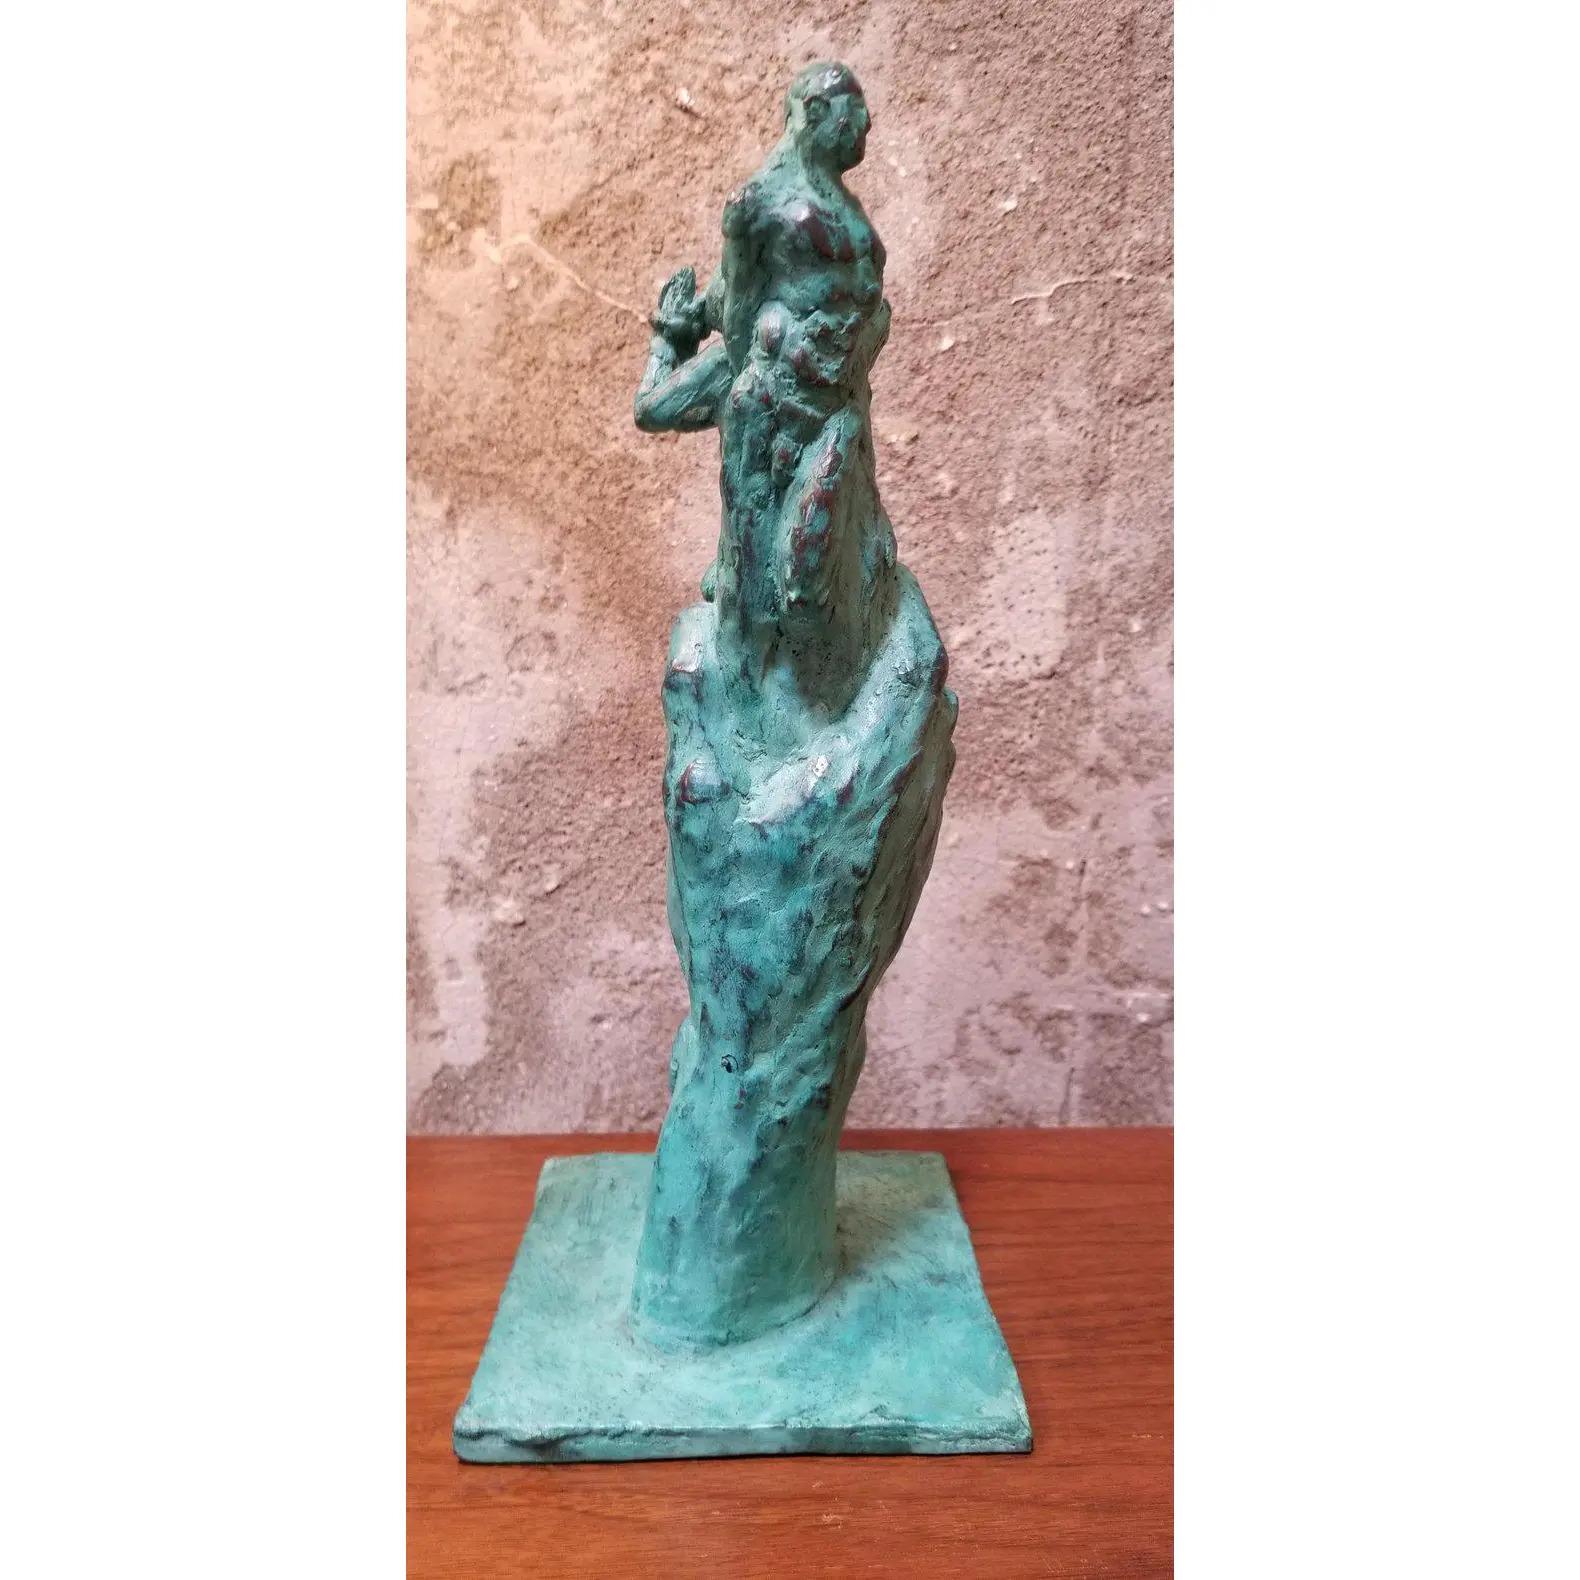 Bronze Sculpture Figures and Hand In Good Condition For Sale In Fulton, CA